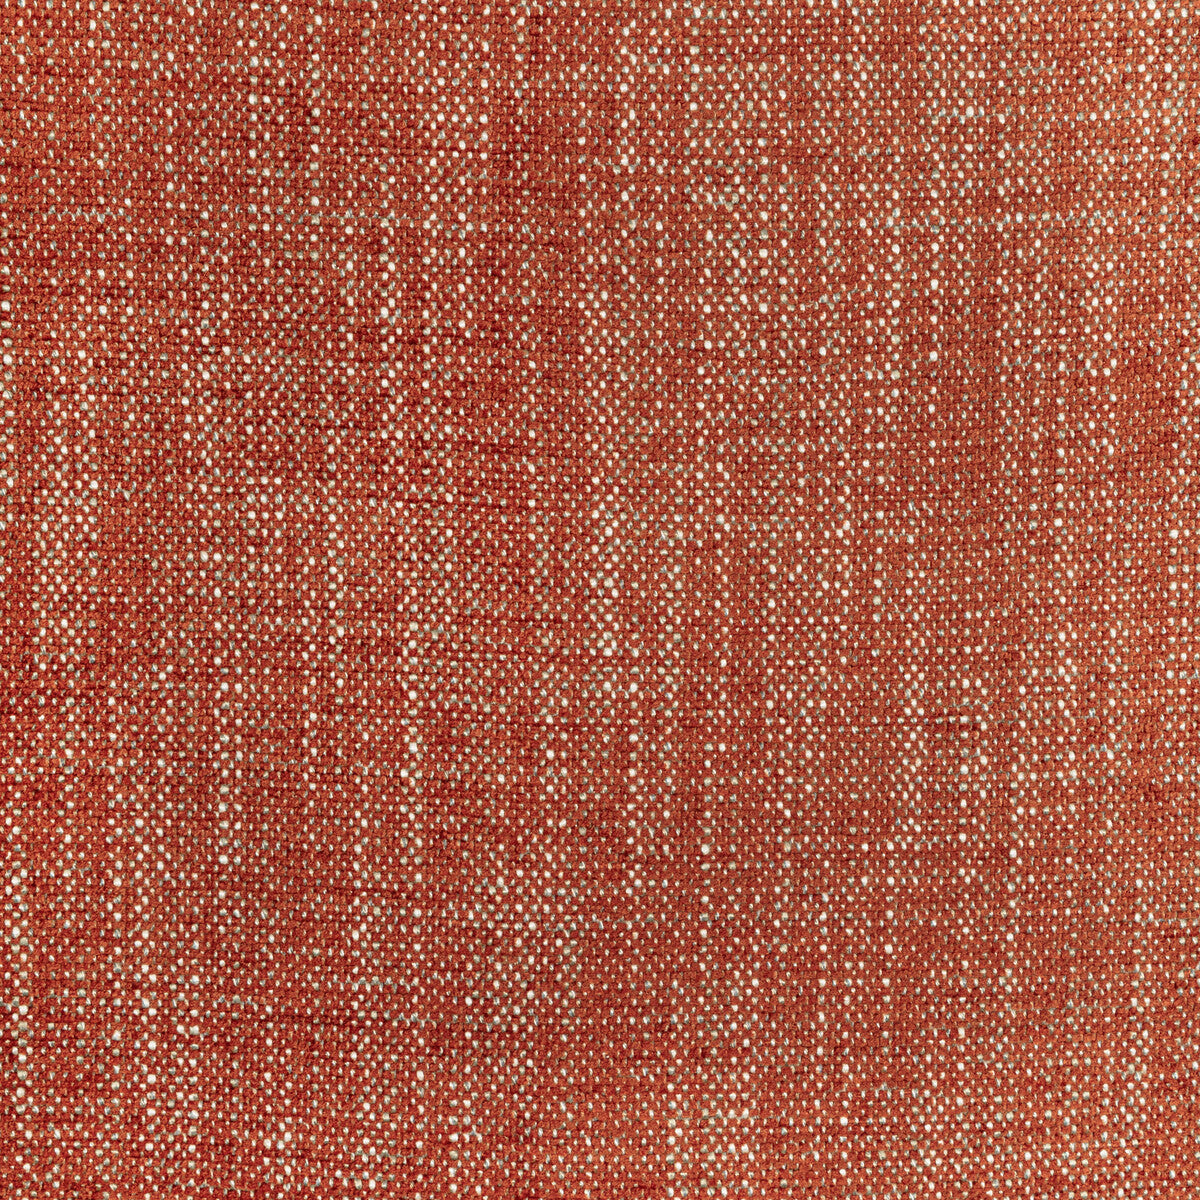 Kravet Design fabric in 36408-19 color - pattern 36408.19.0 - by Kravet Design in the Performance Crypton Home collection